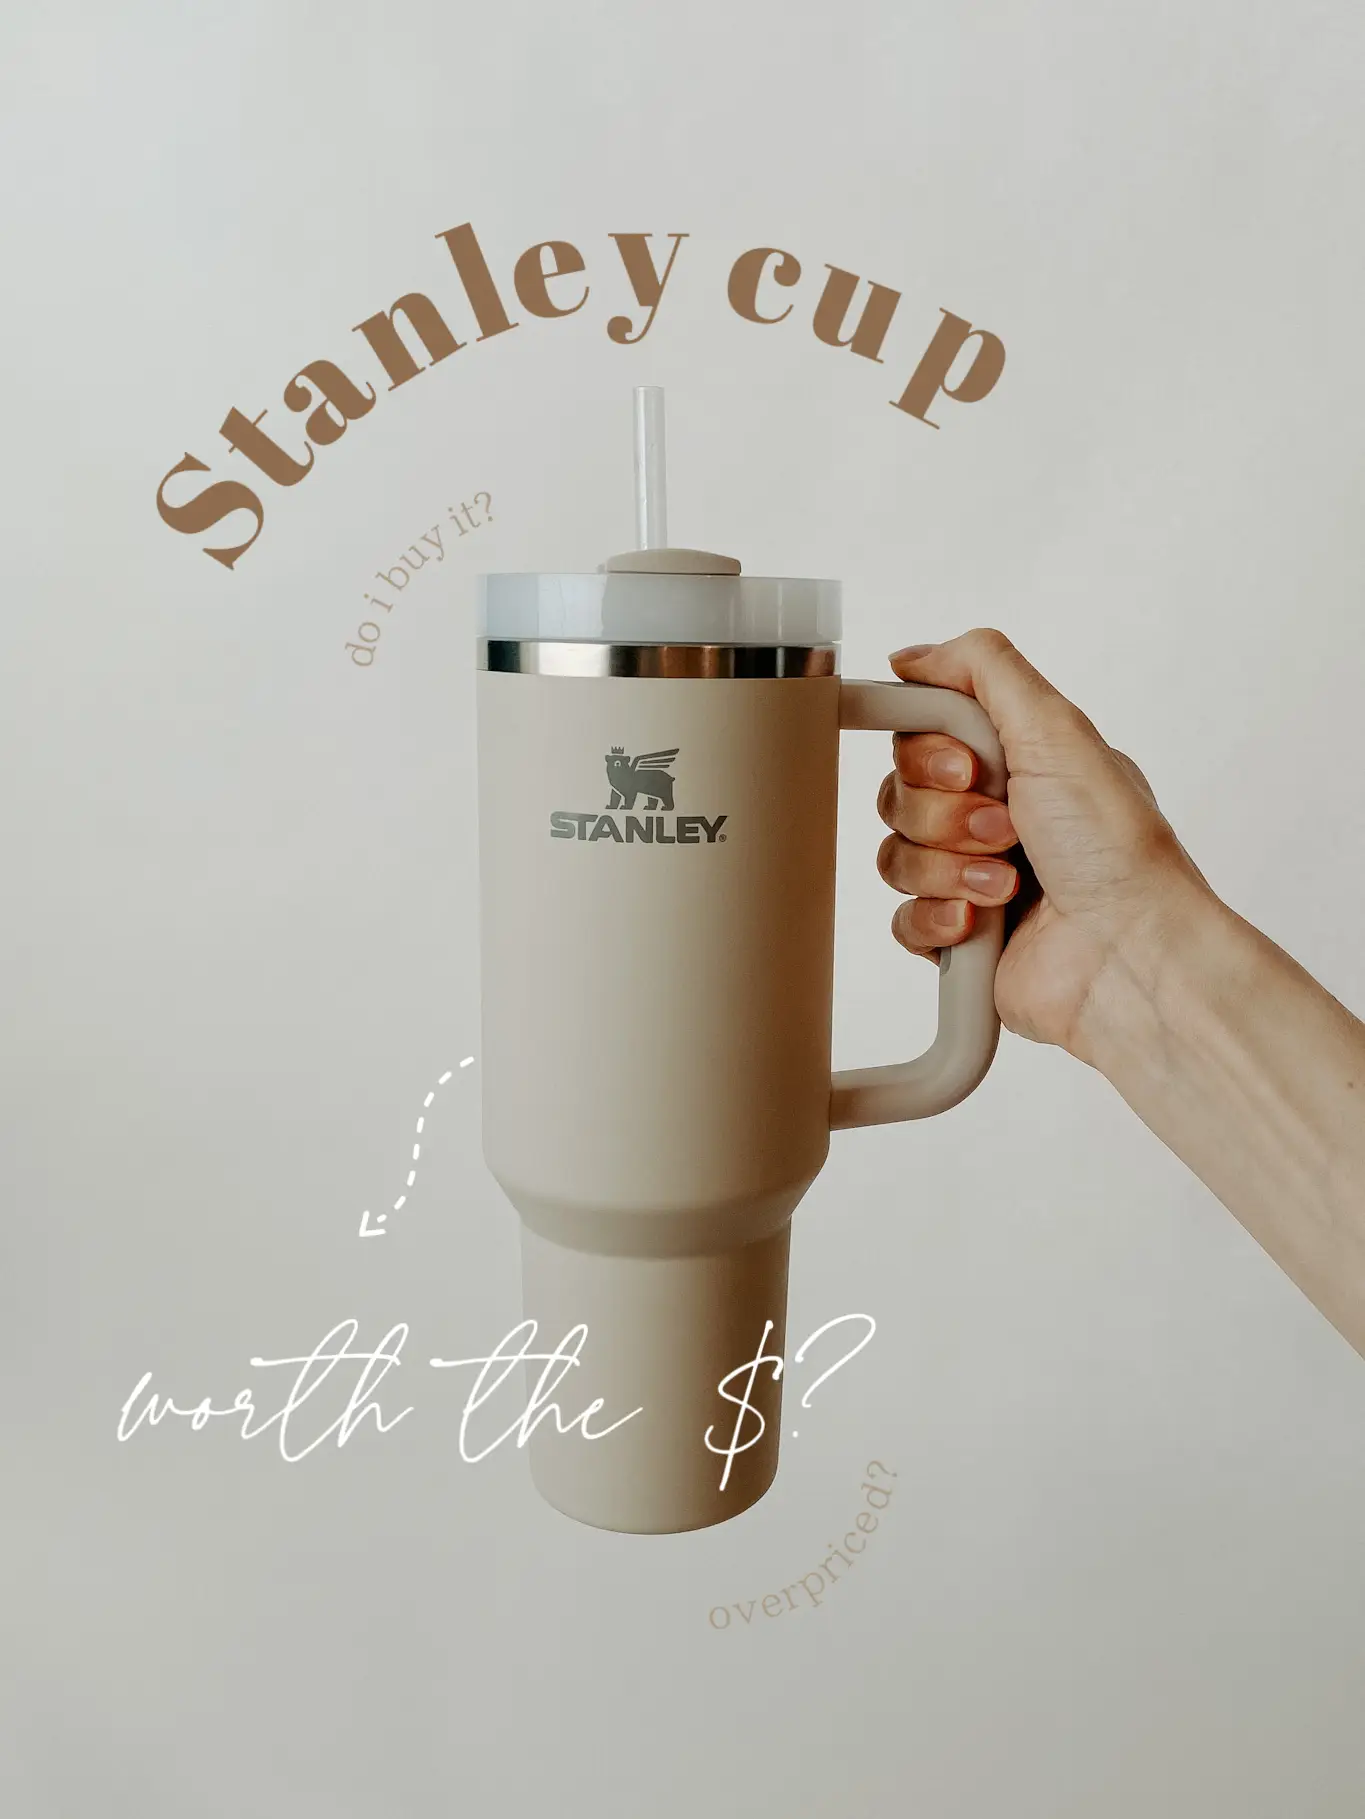 the most common question I get about how 40 oz Stanleys compare to Dup, Stanley Tumbler